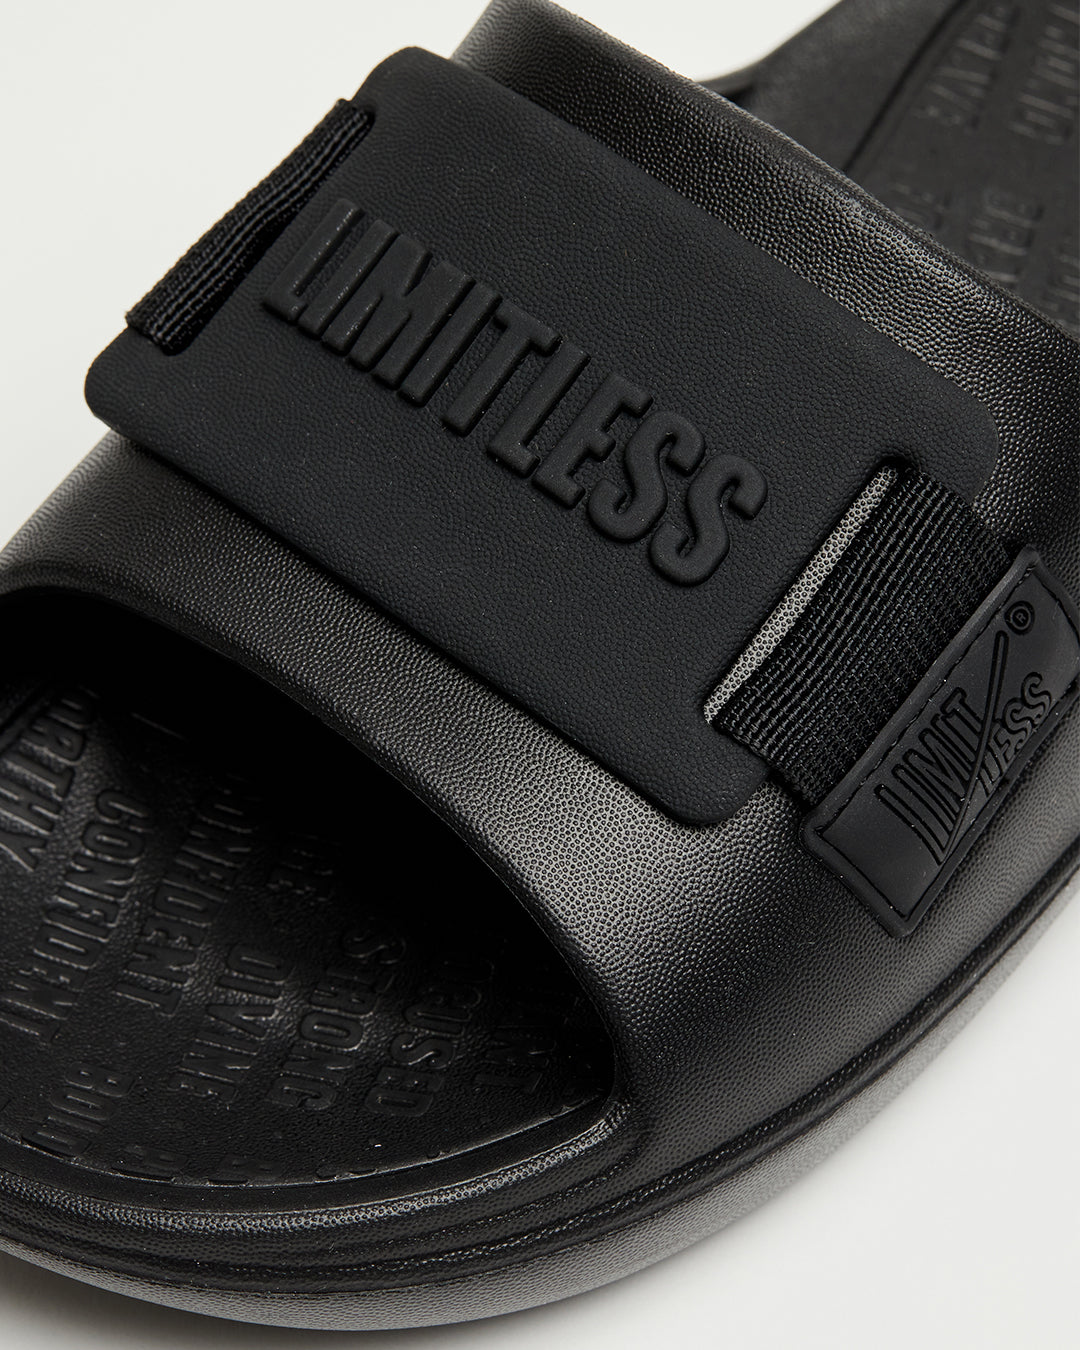 LIMITLESS SLIDES™ WITH ESSENTIAL TIBAH™ QUAD - IMATER ACADEMY EDITION